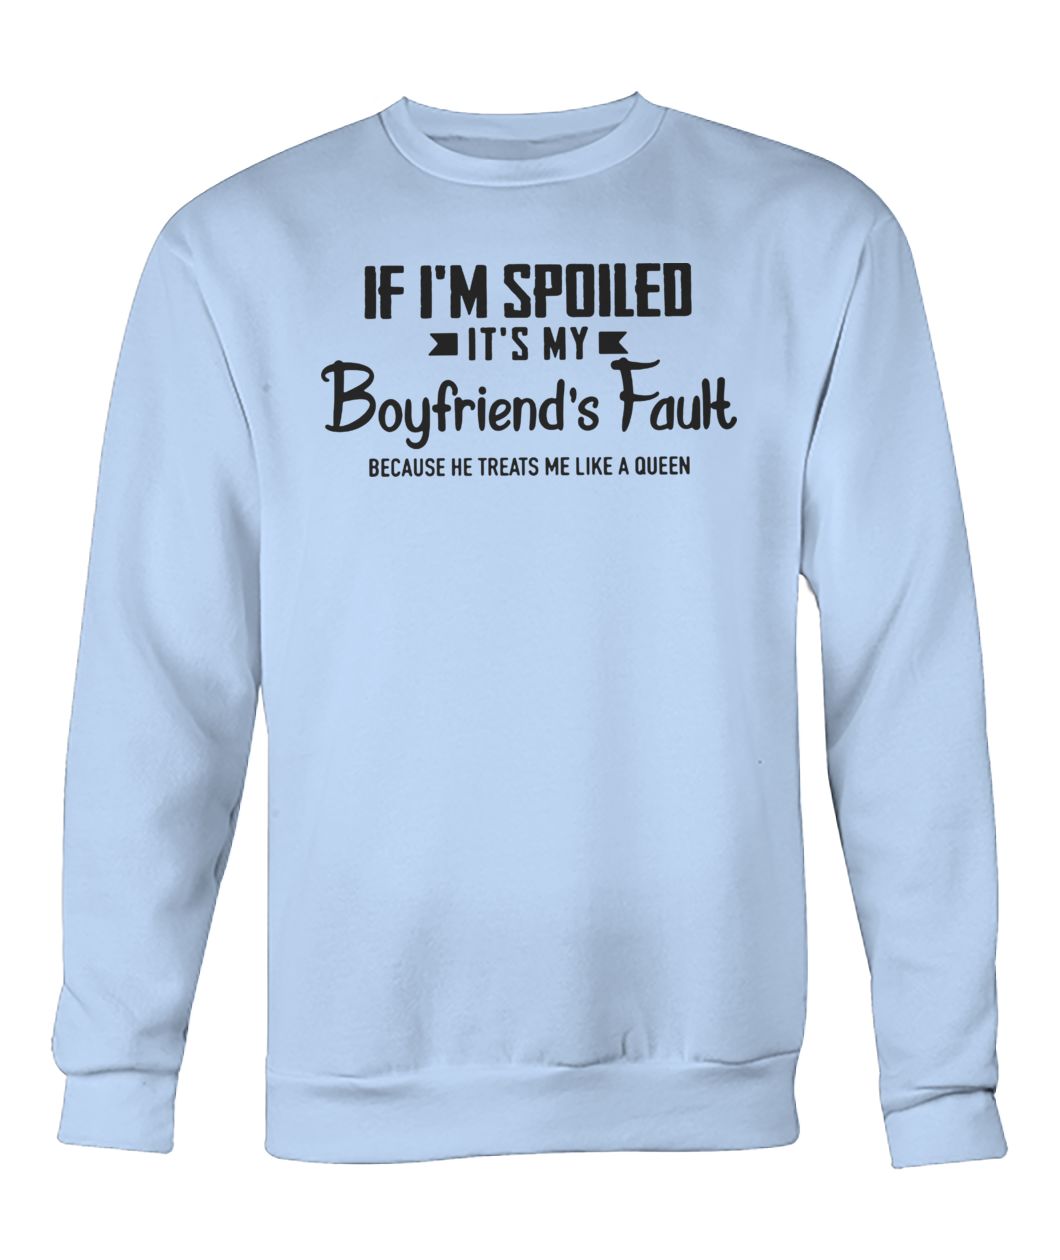 If I'm spoiled it's my boyfriend's fault because he treats me like a queen crew neck sweatshirt